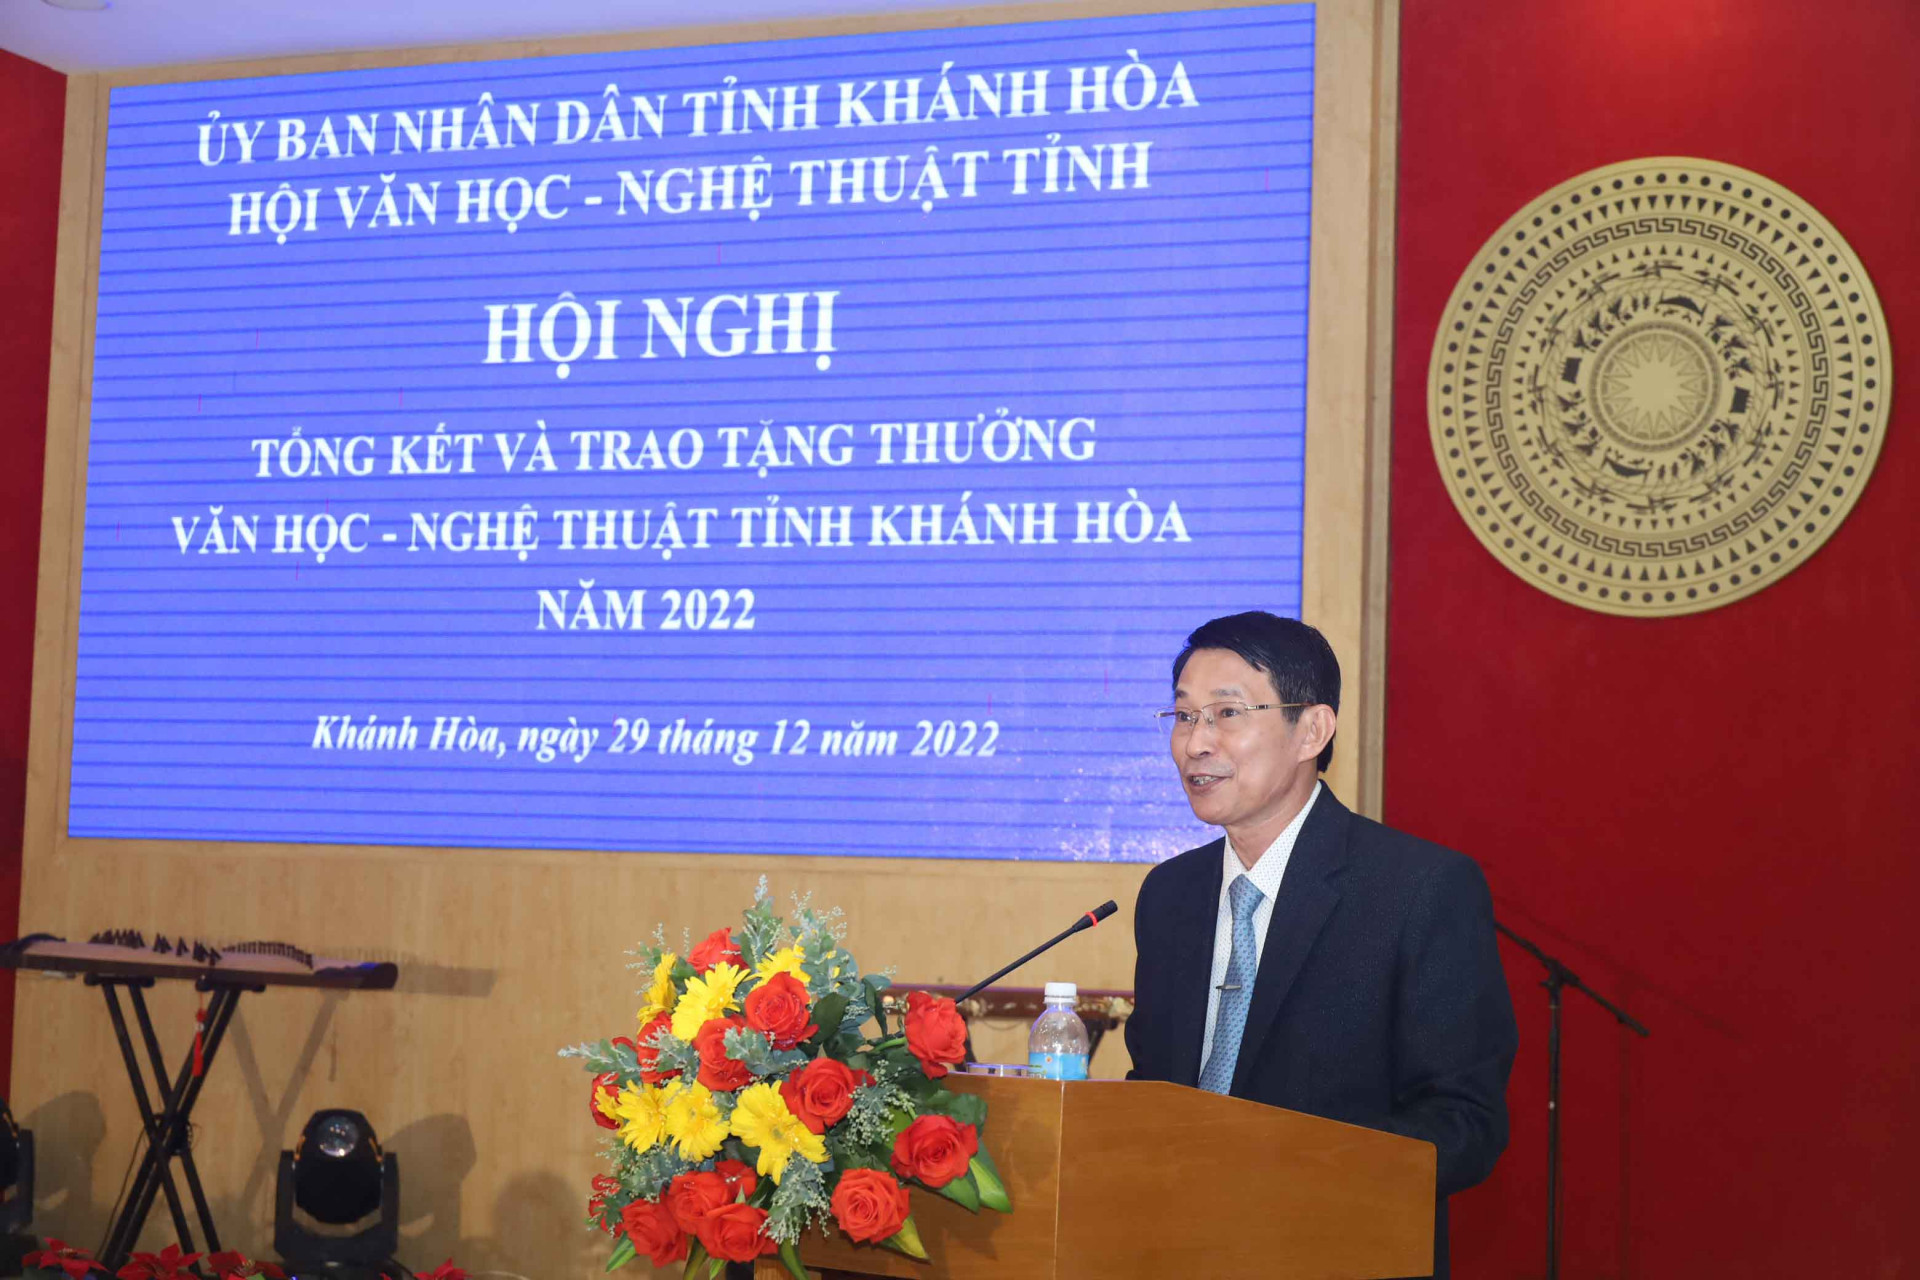 Dinh Van Thieu speaking at the ceremony